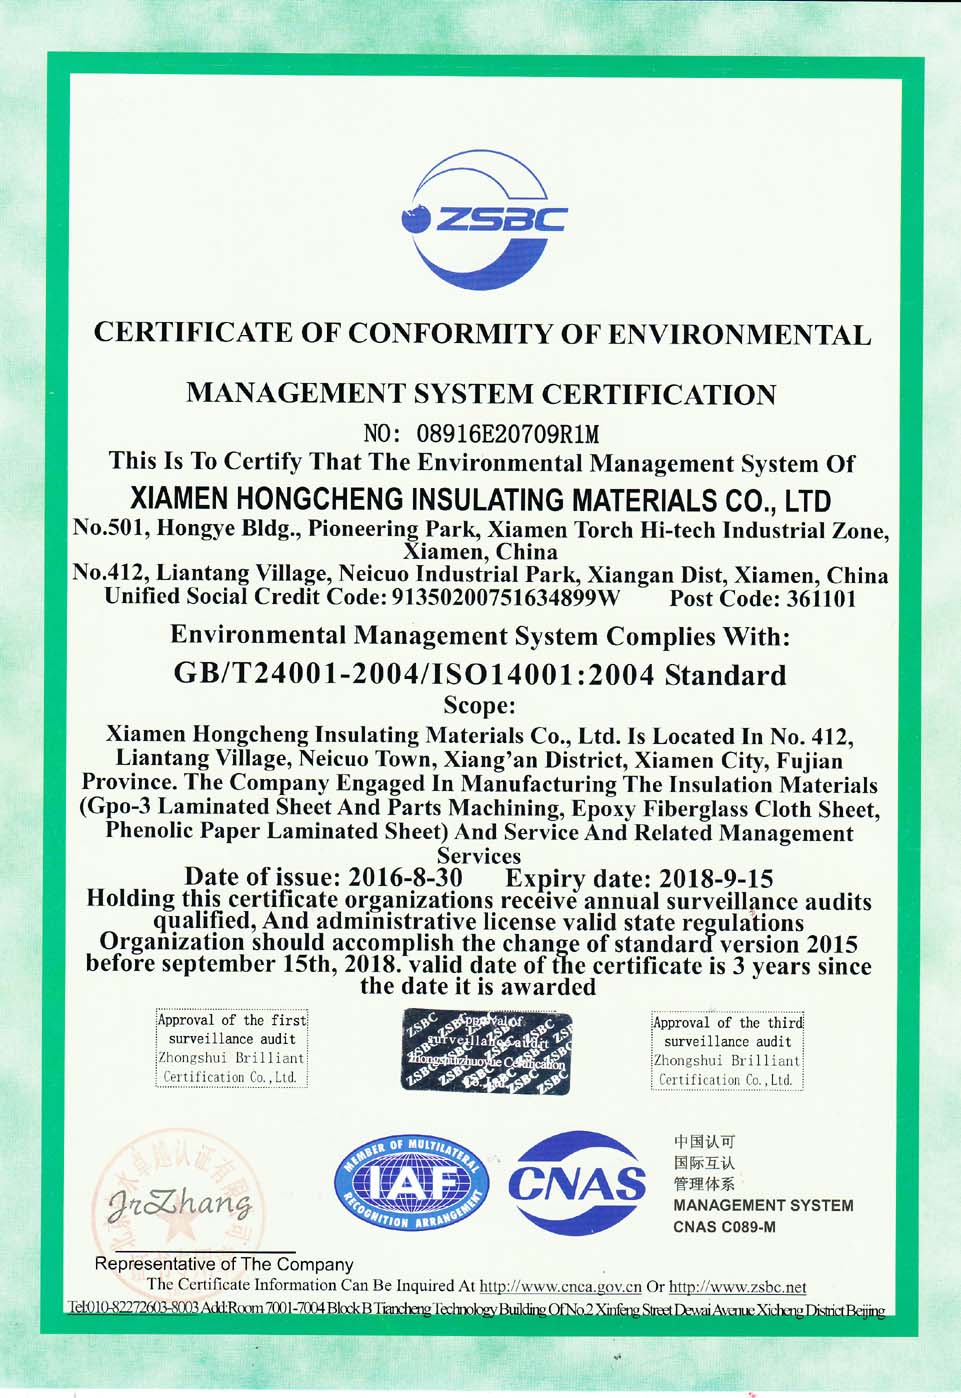 Certificate of conformity and environmental management system certification